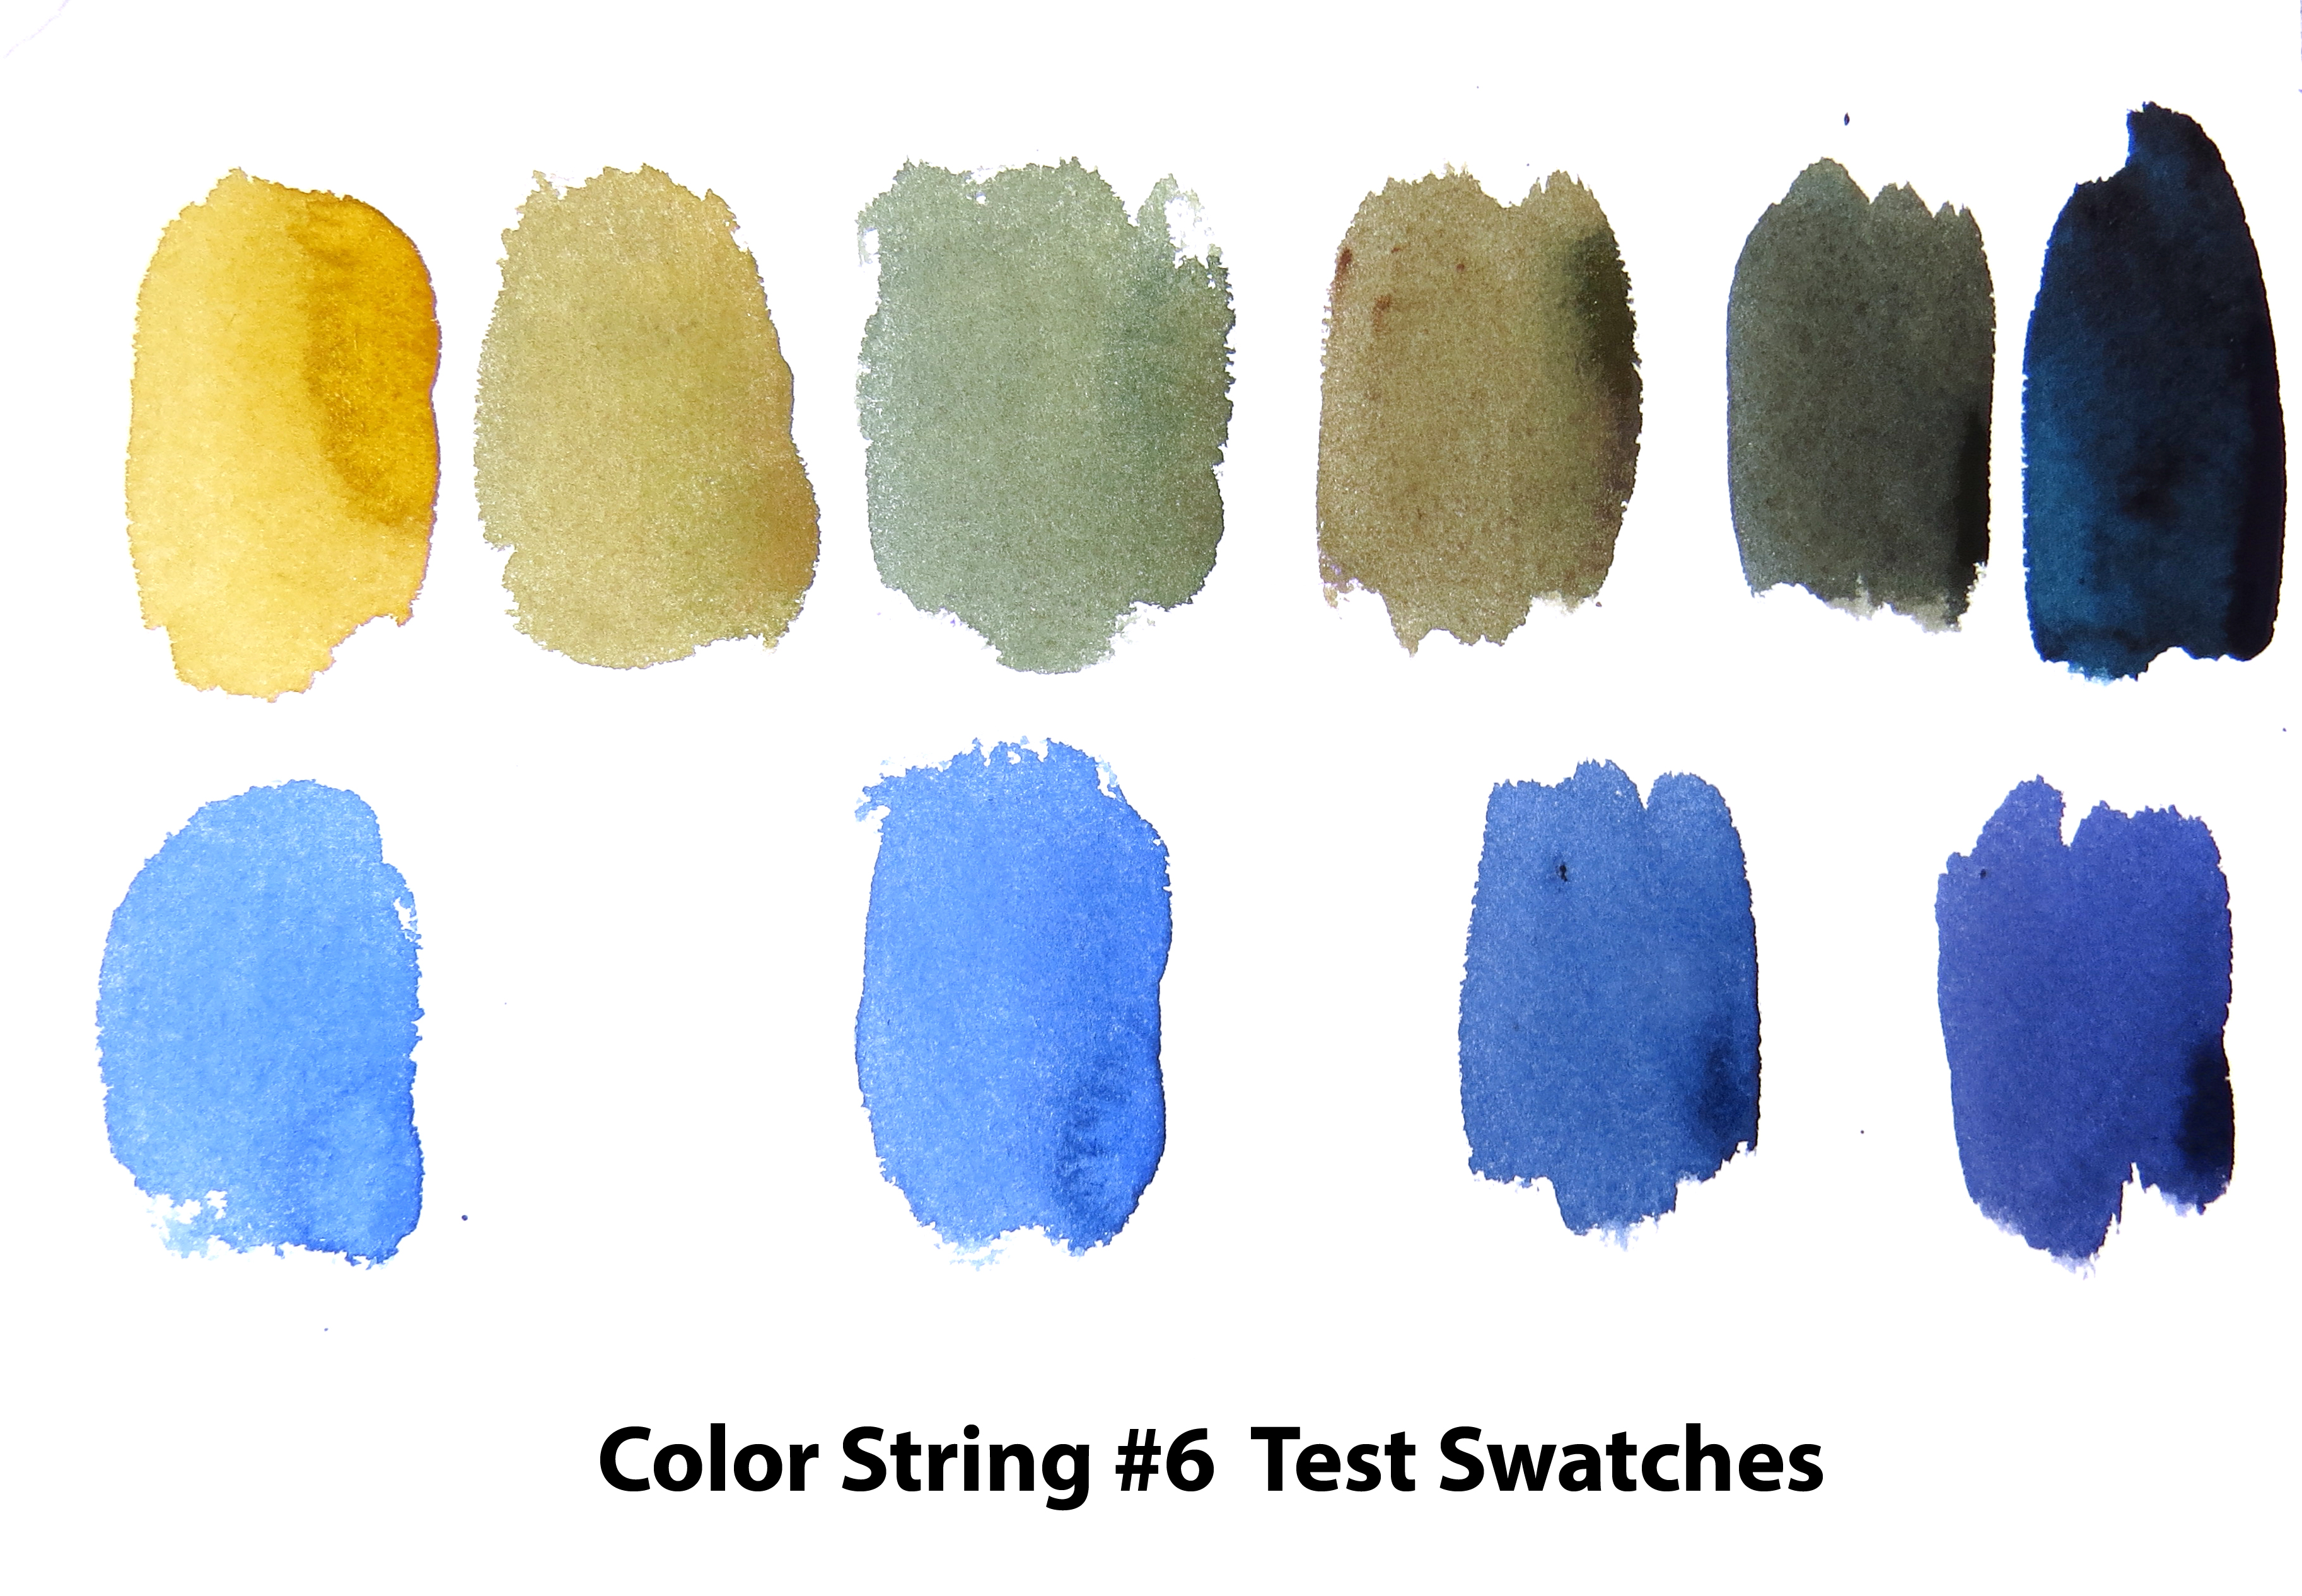 color test swatch #6, duck